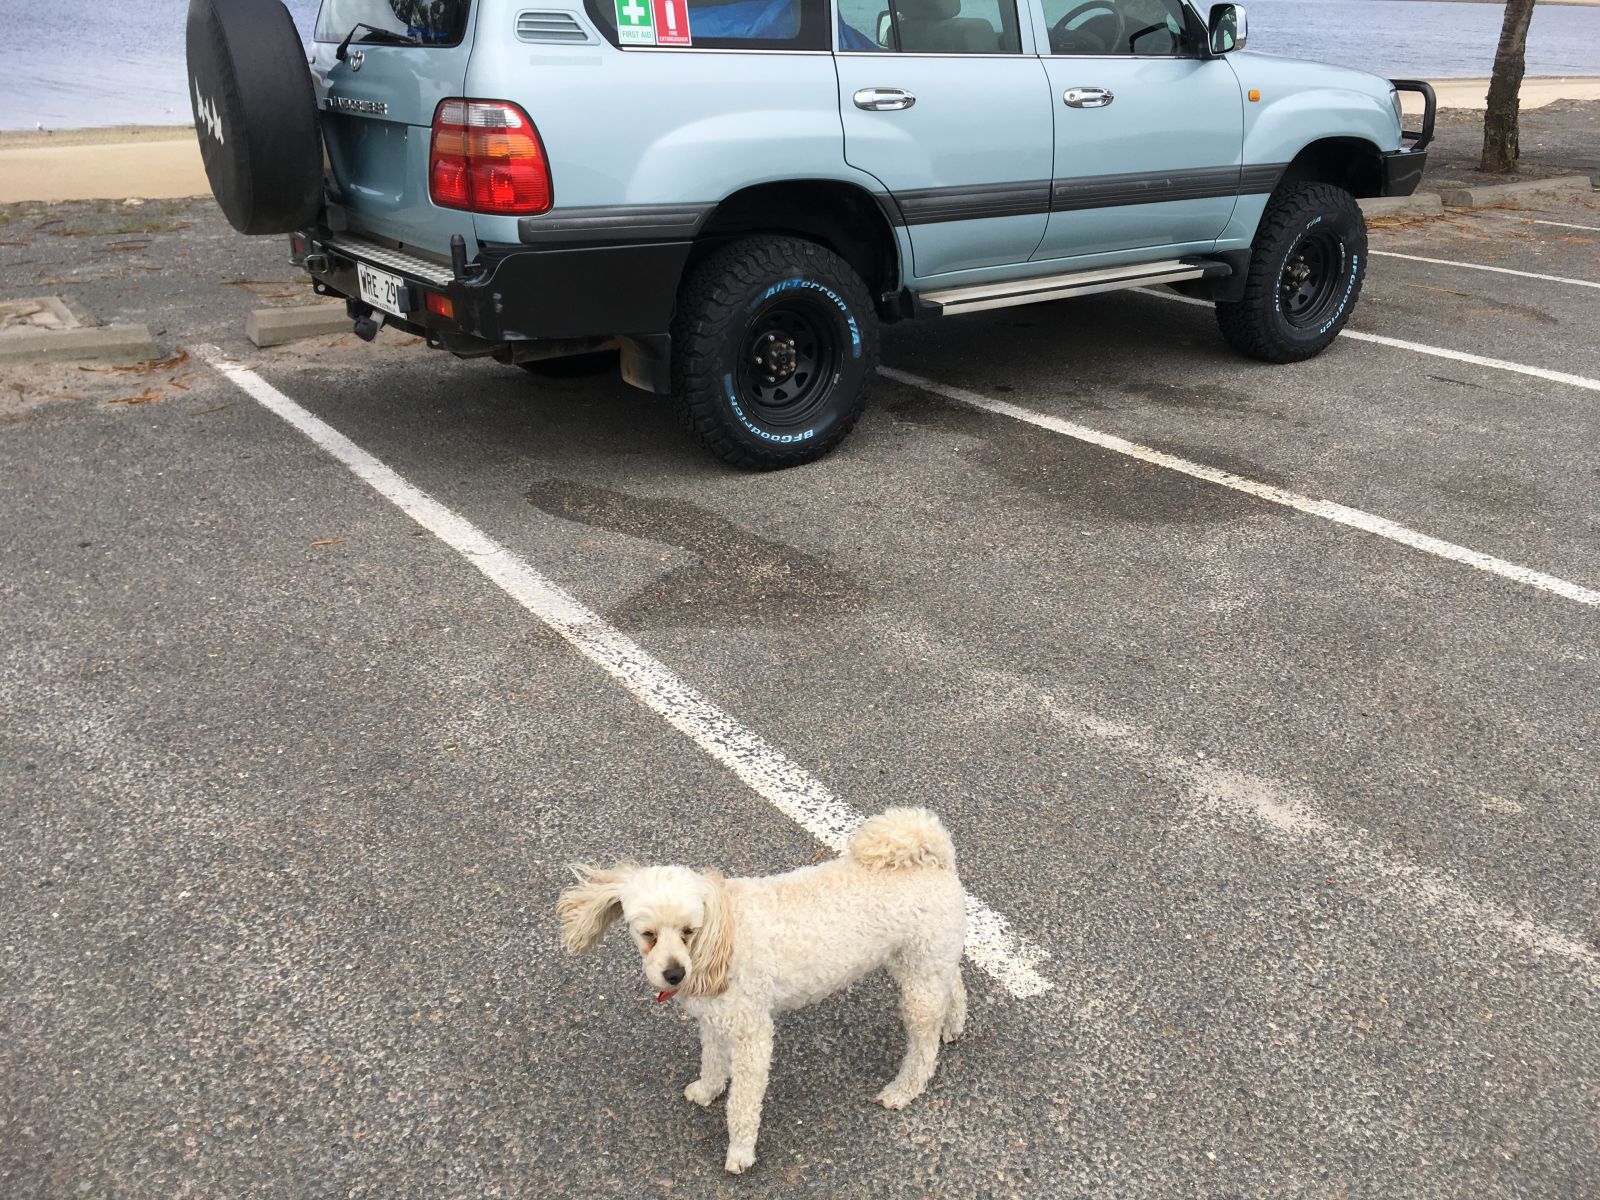 This Land Cruiser fan came over to check me out while I took a photo, certainly was a friendy pooch.